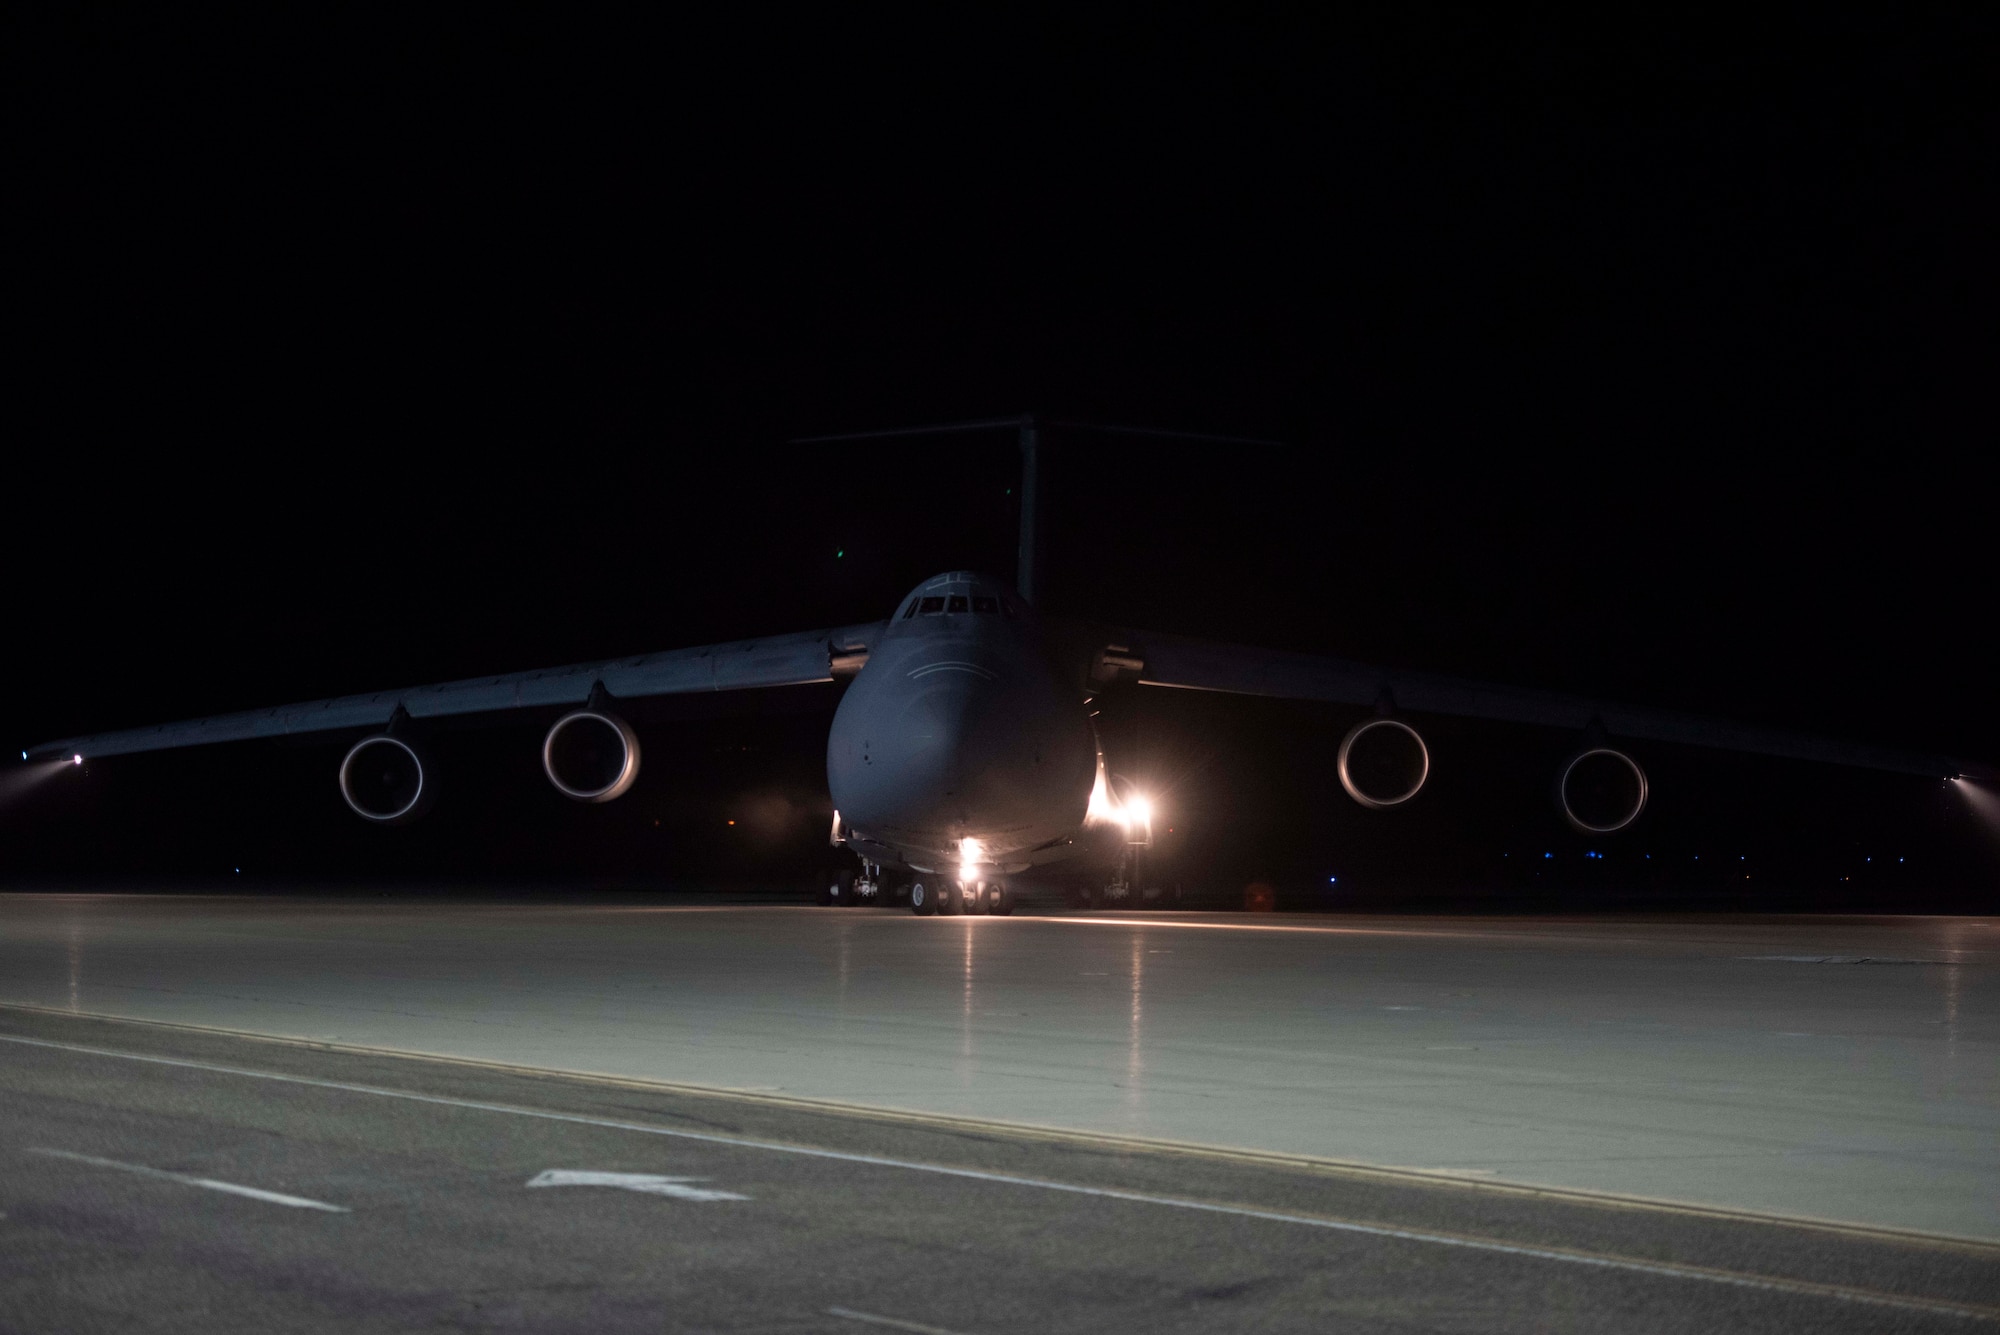 A large military aircraft drives on the flight line at night.